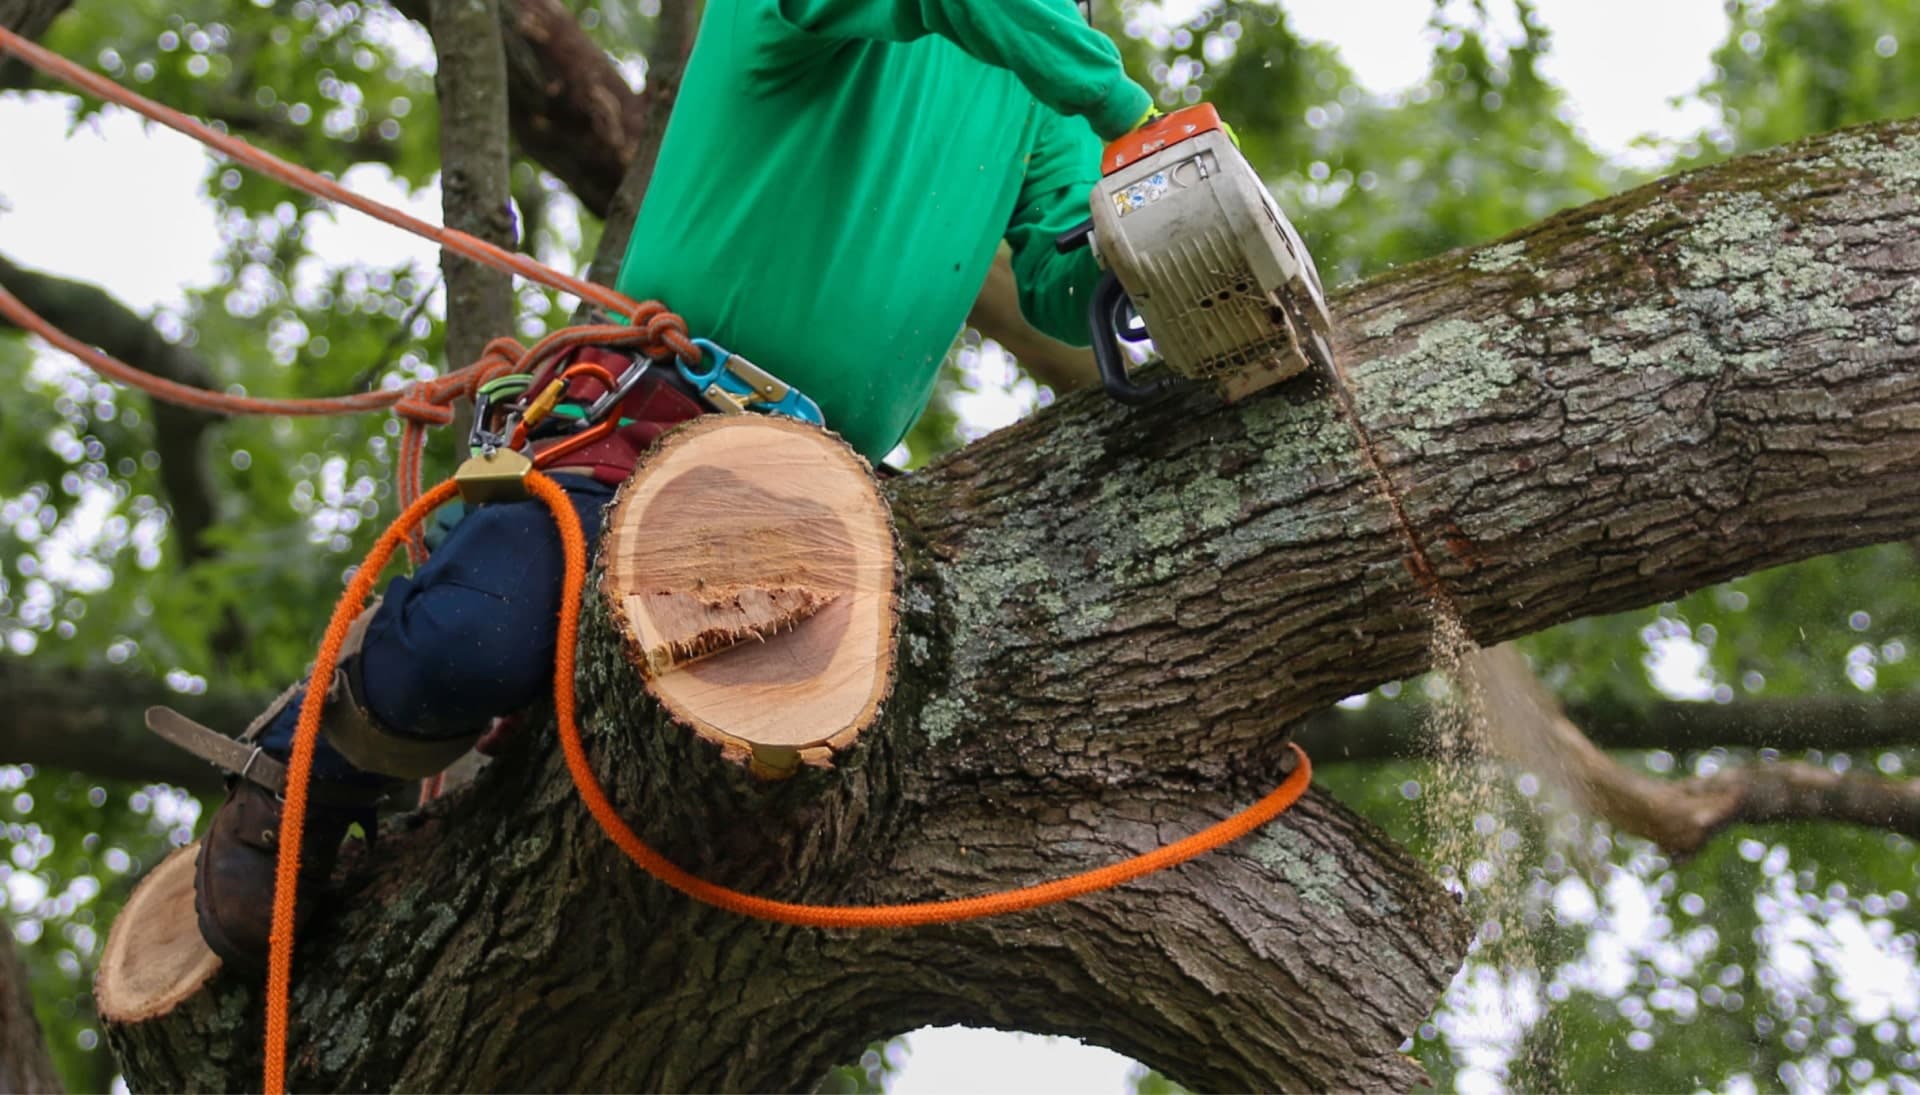 Shed your worries away with best tree removal in New Jersey